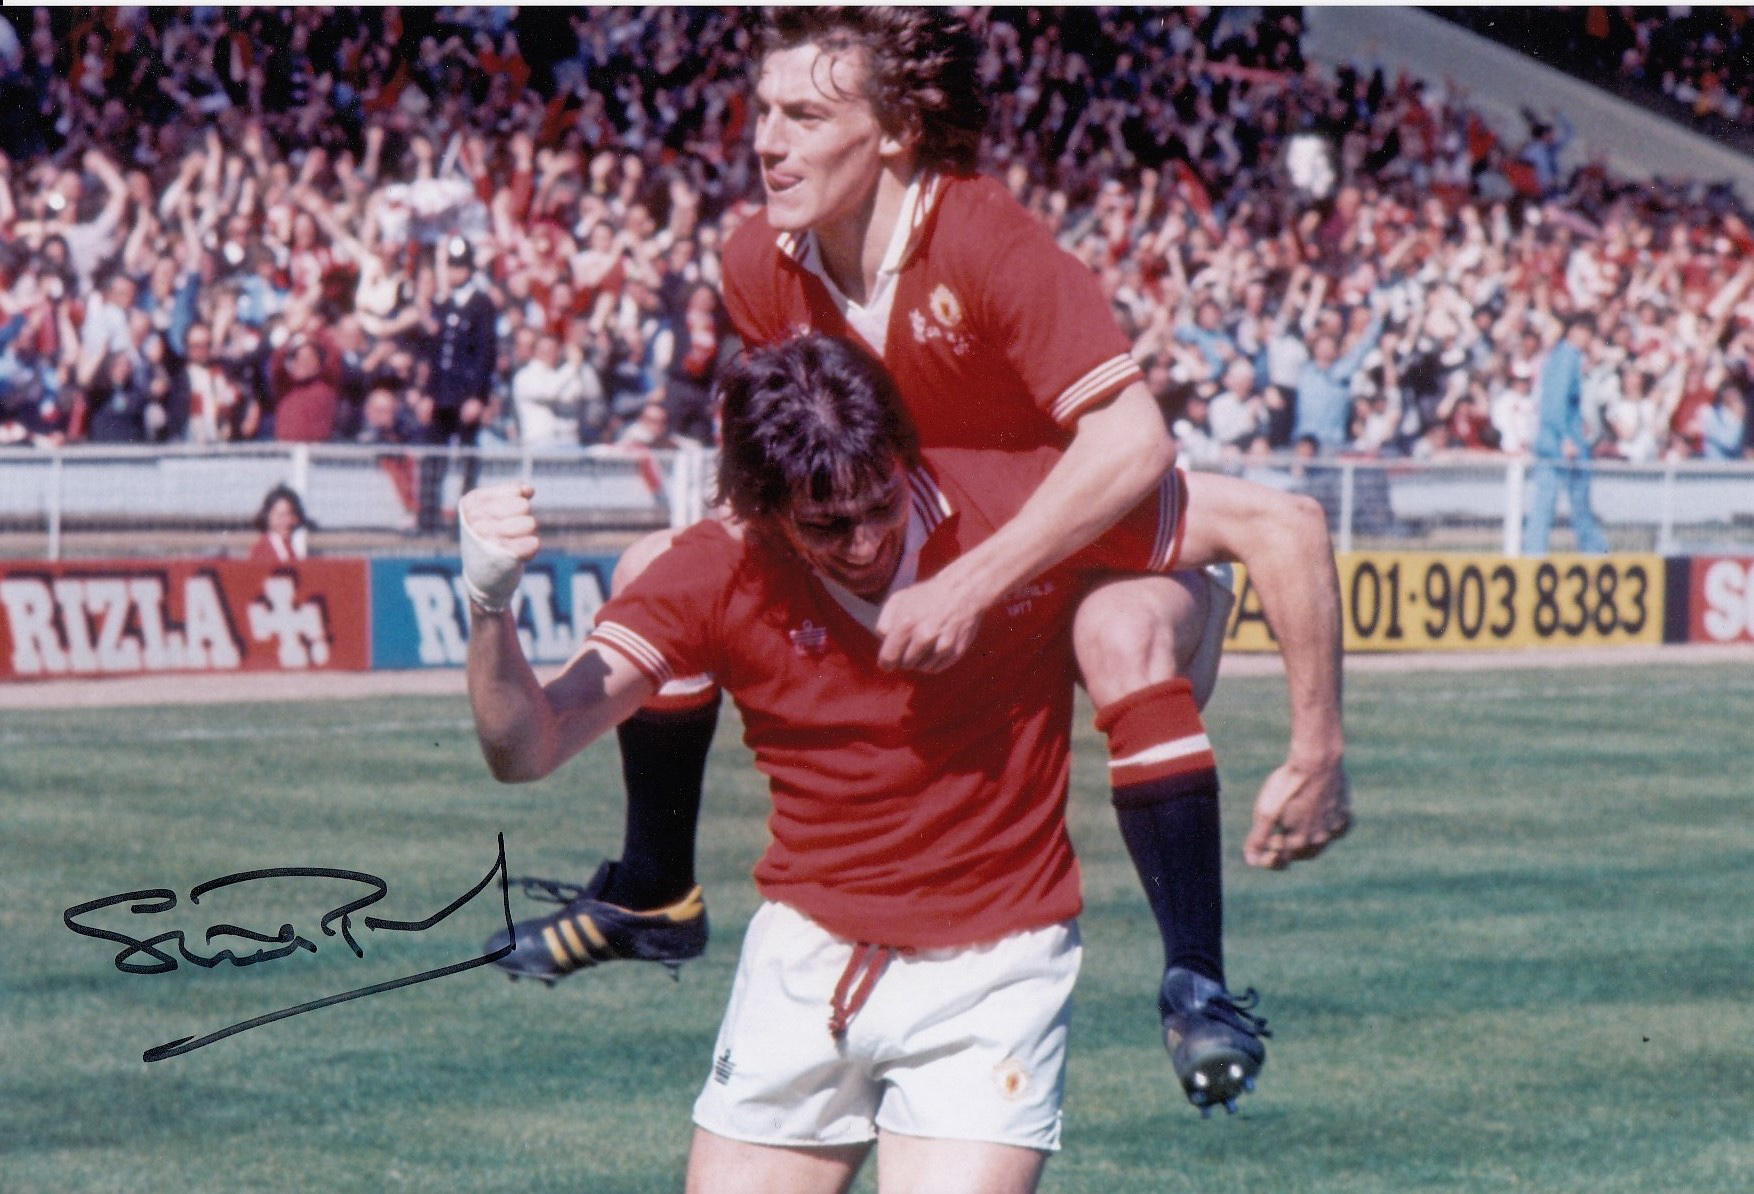 Autographed Stuart Pearson 12 X 8 Photo - Col, Depicting Steve Coppell Leaping Upon Team Mate Stuart